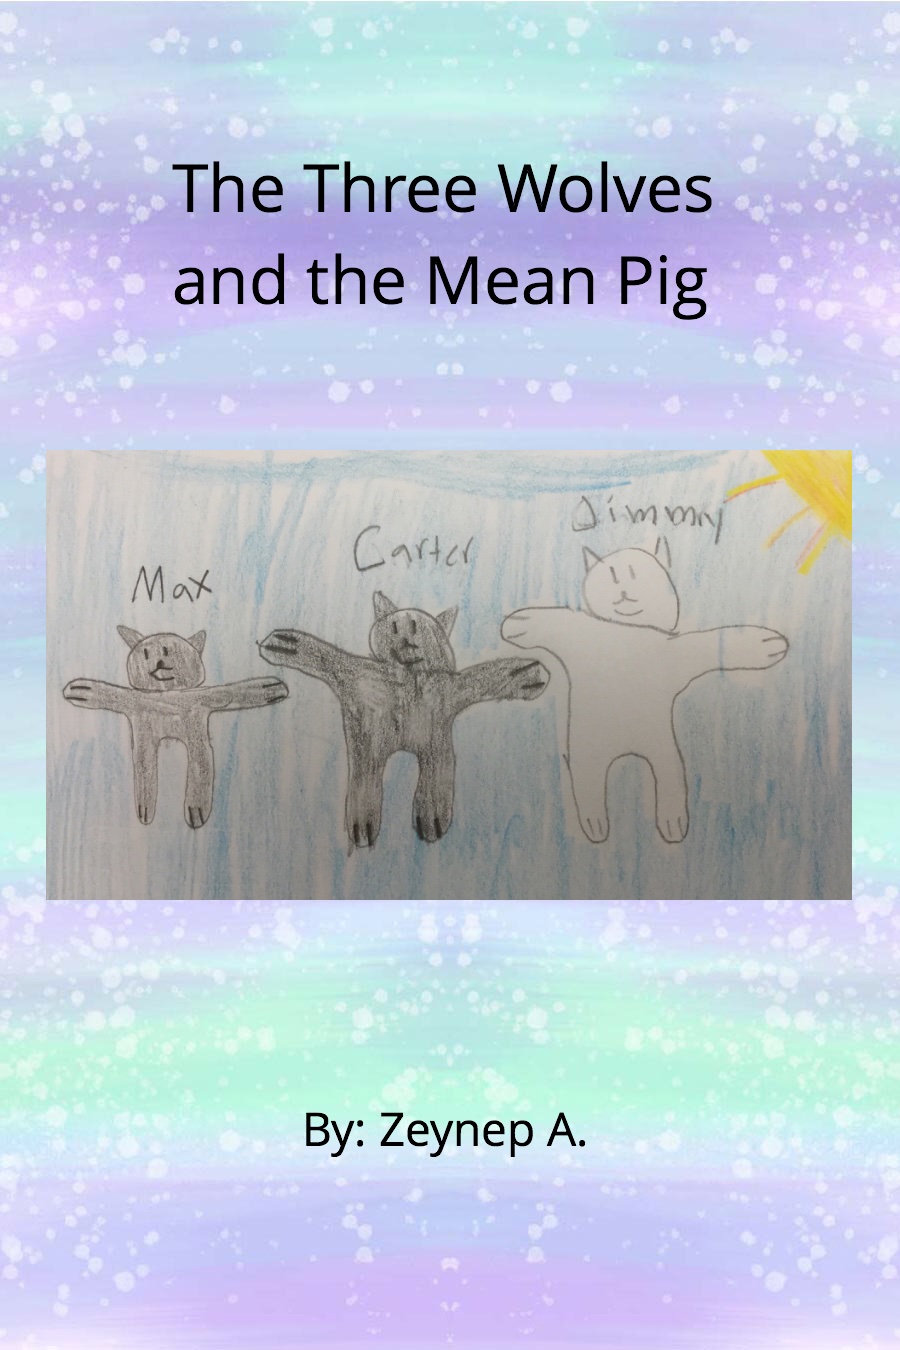 The Three Little Wolves and the Mean Pig by Zeynep A